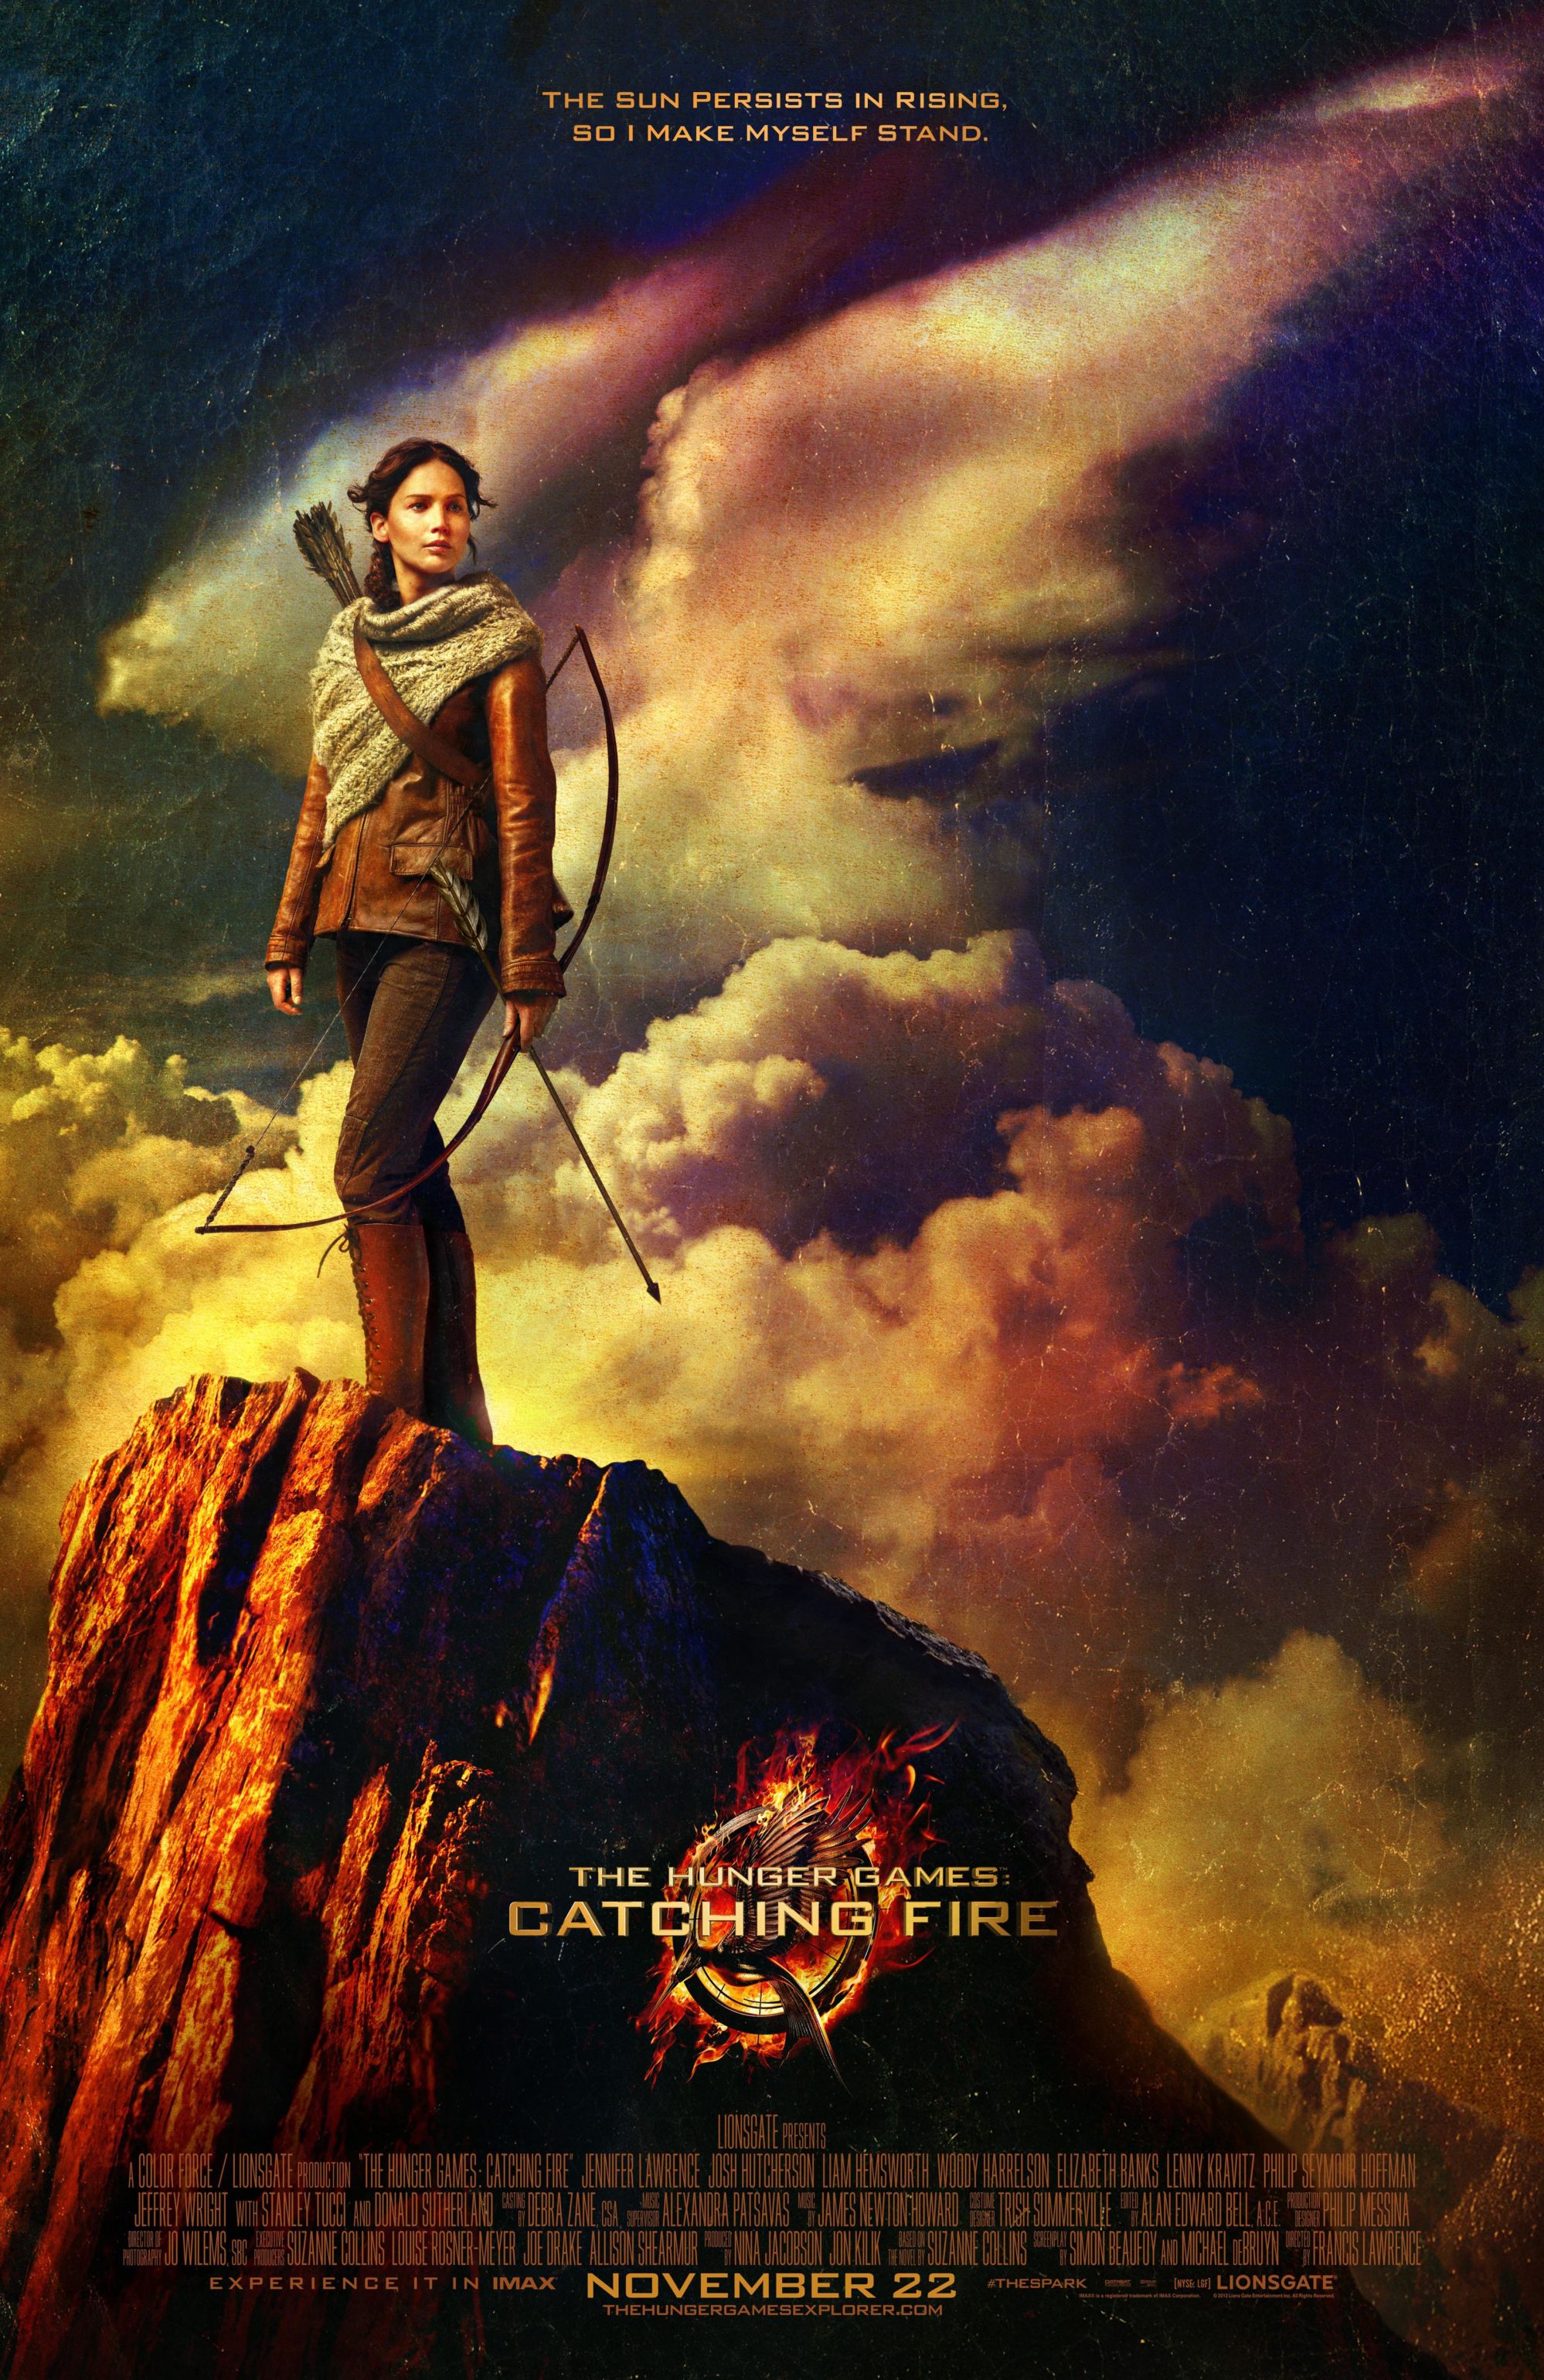 FIRST Official The Hunger Games: Catching Fire Poster Released